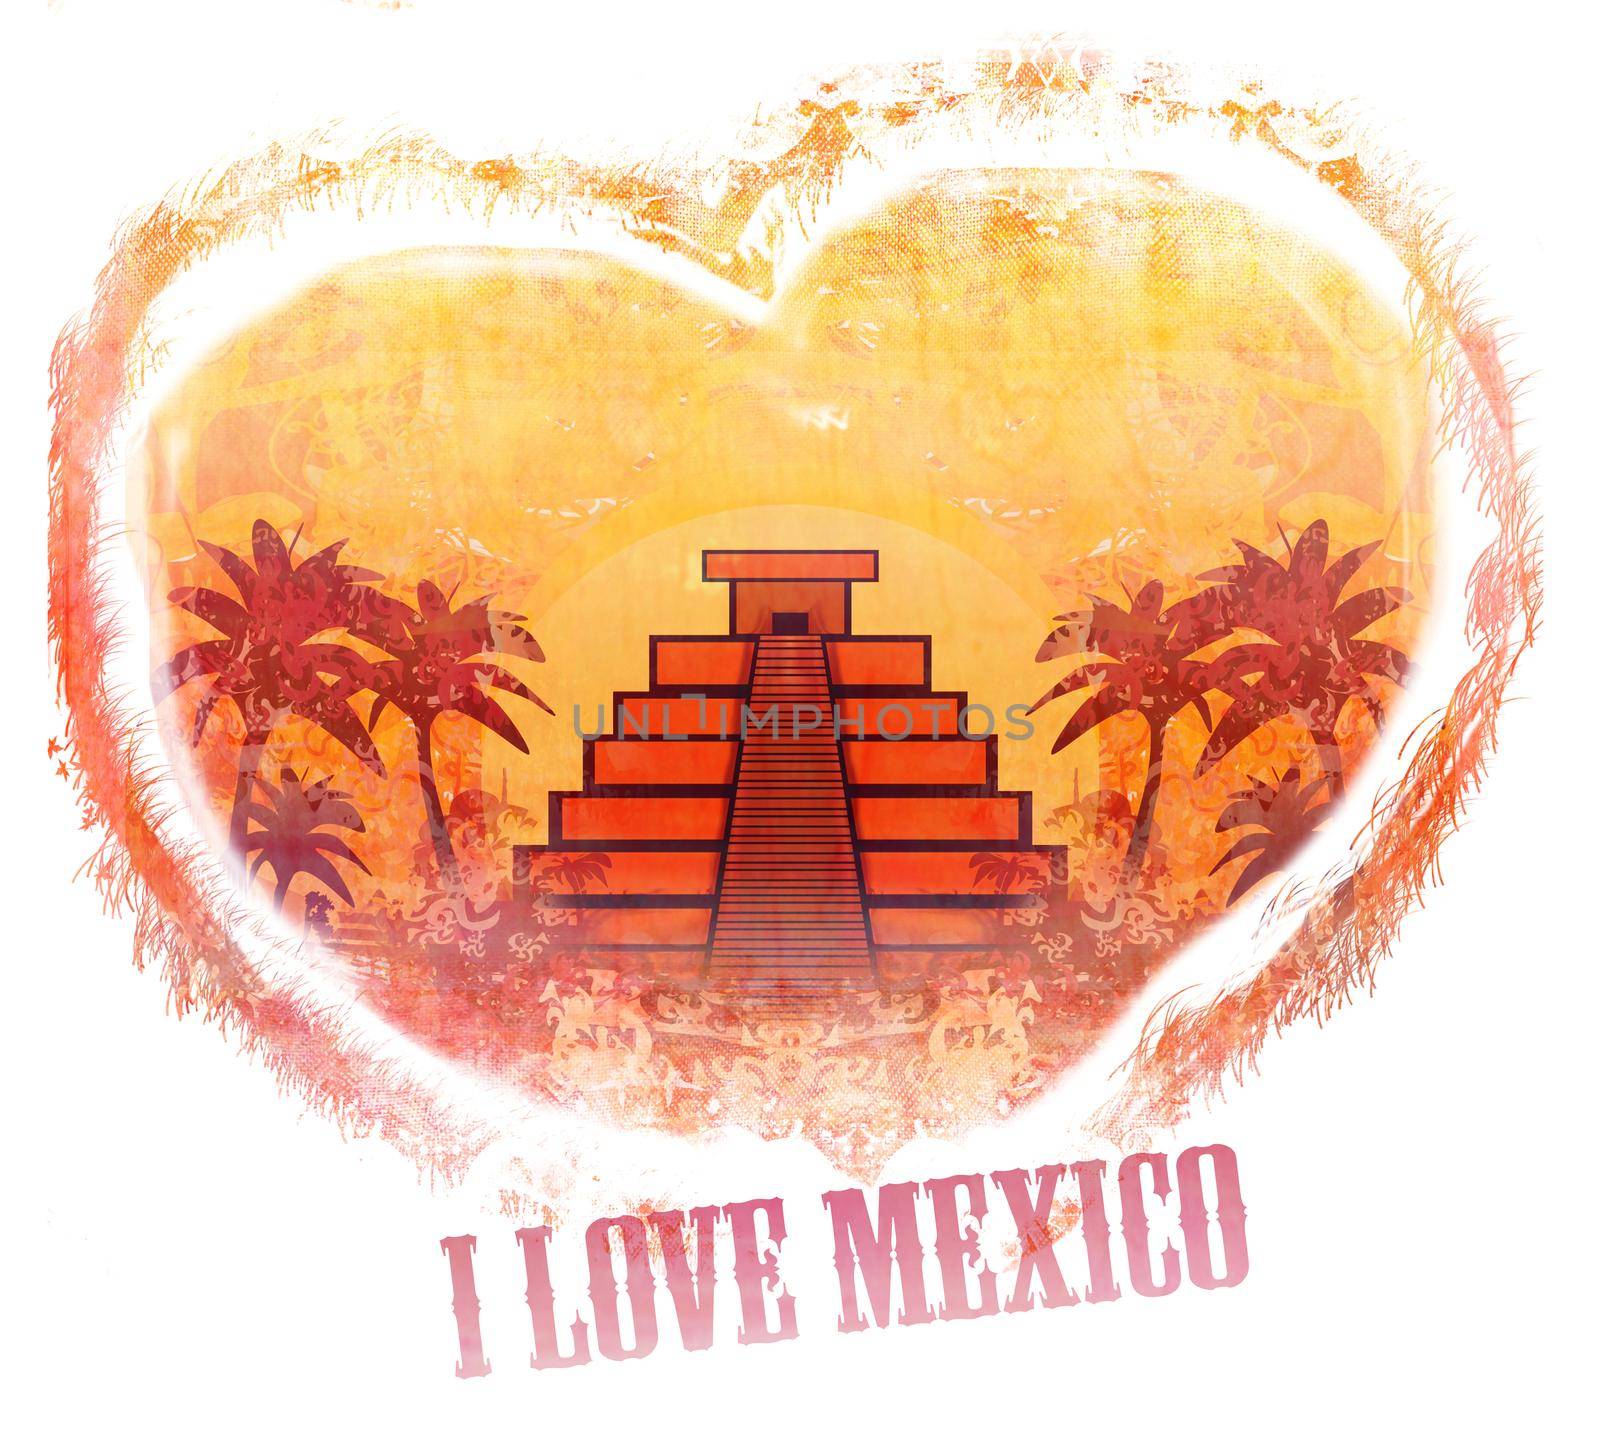 I Love Mexico design by JackyBrown